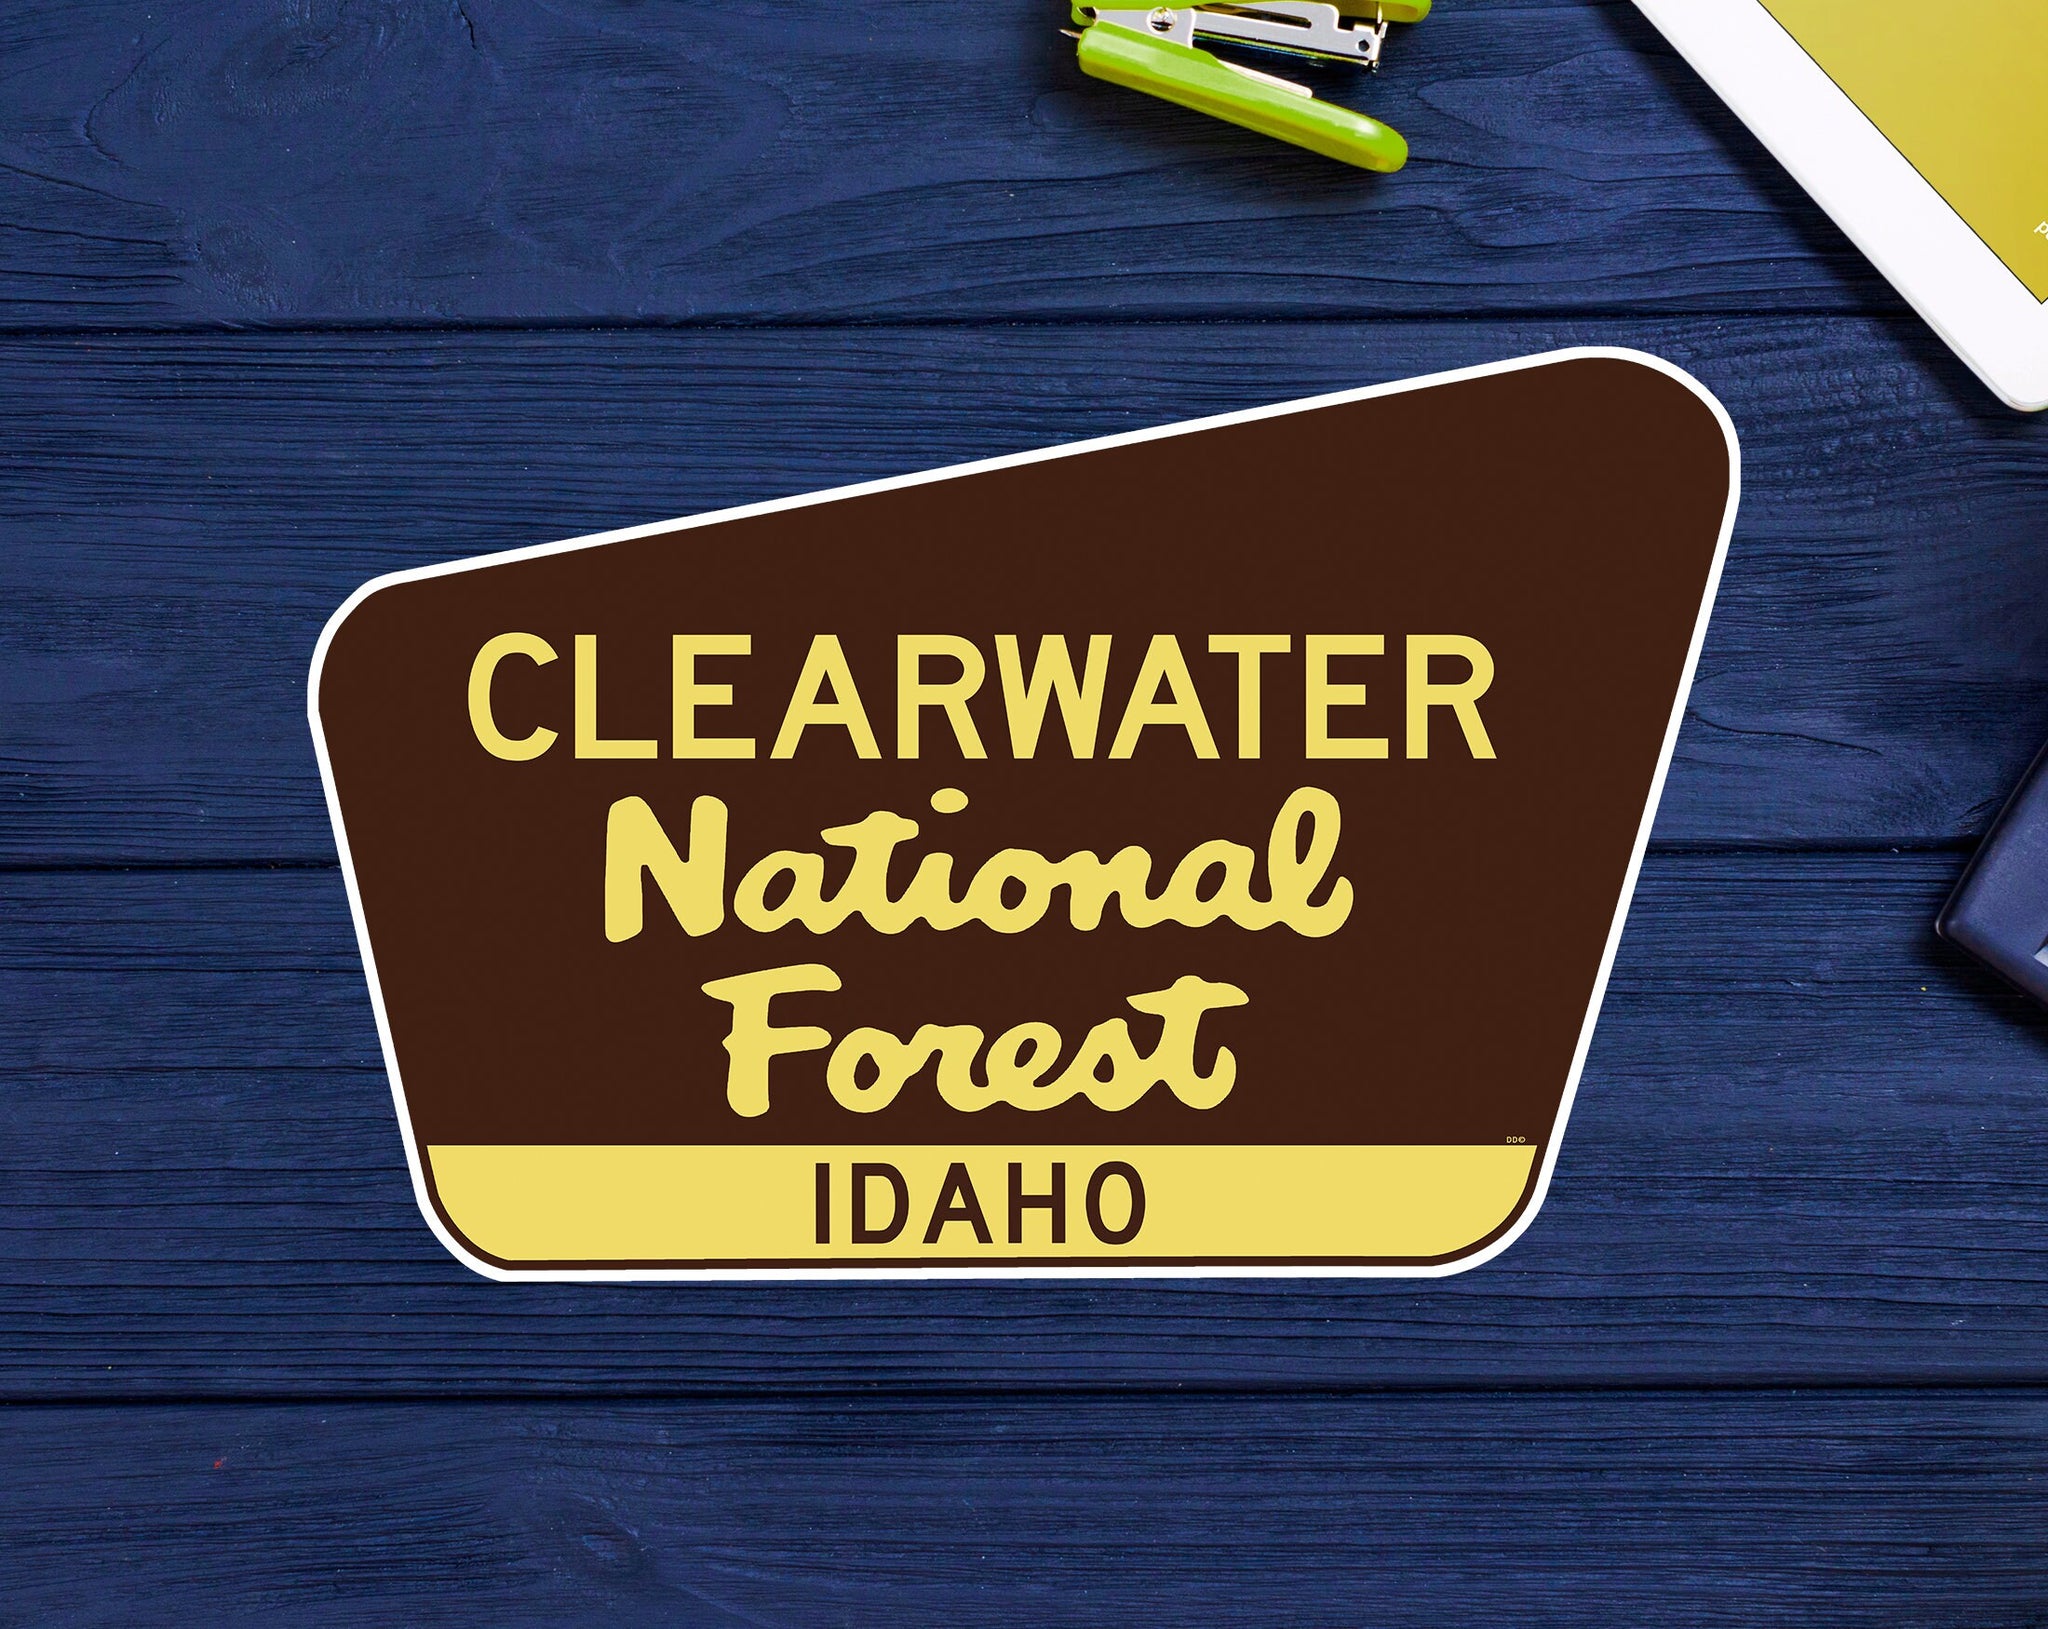 Clearwater National Forest Decal Sticker 3.75" x 2.5" Idaho Park Vinyl